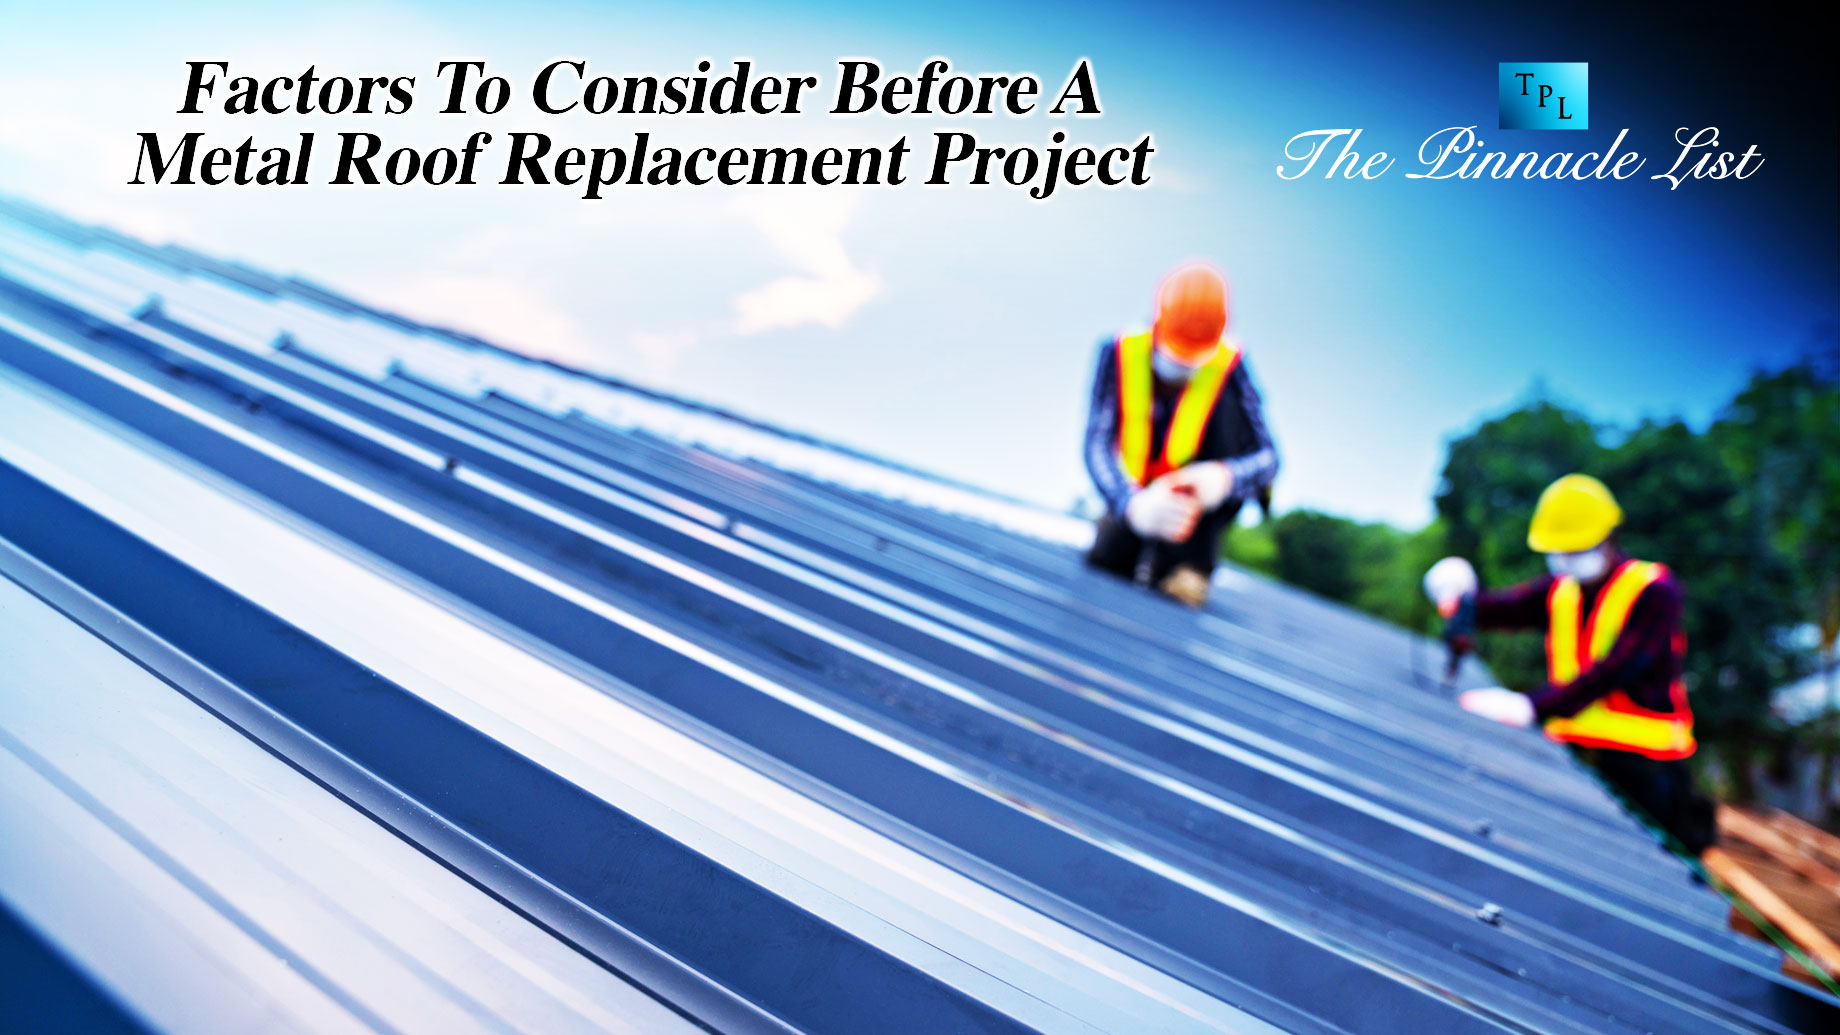 Factors To Consider Before A Metal Roof Replacement Project